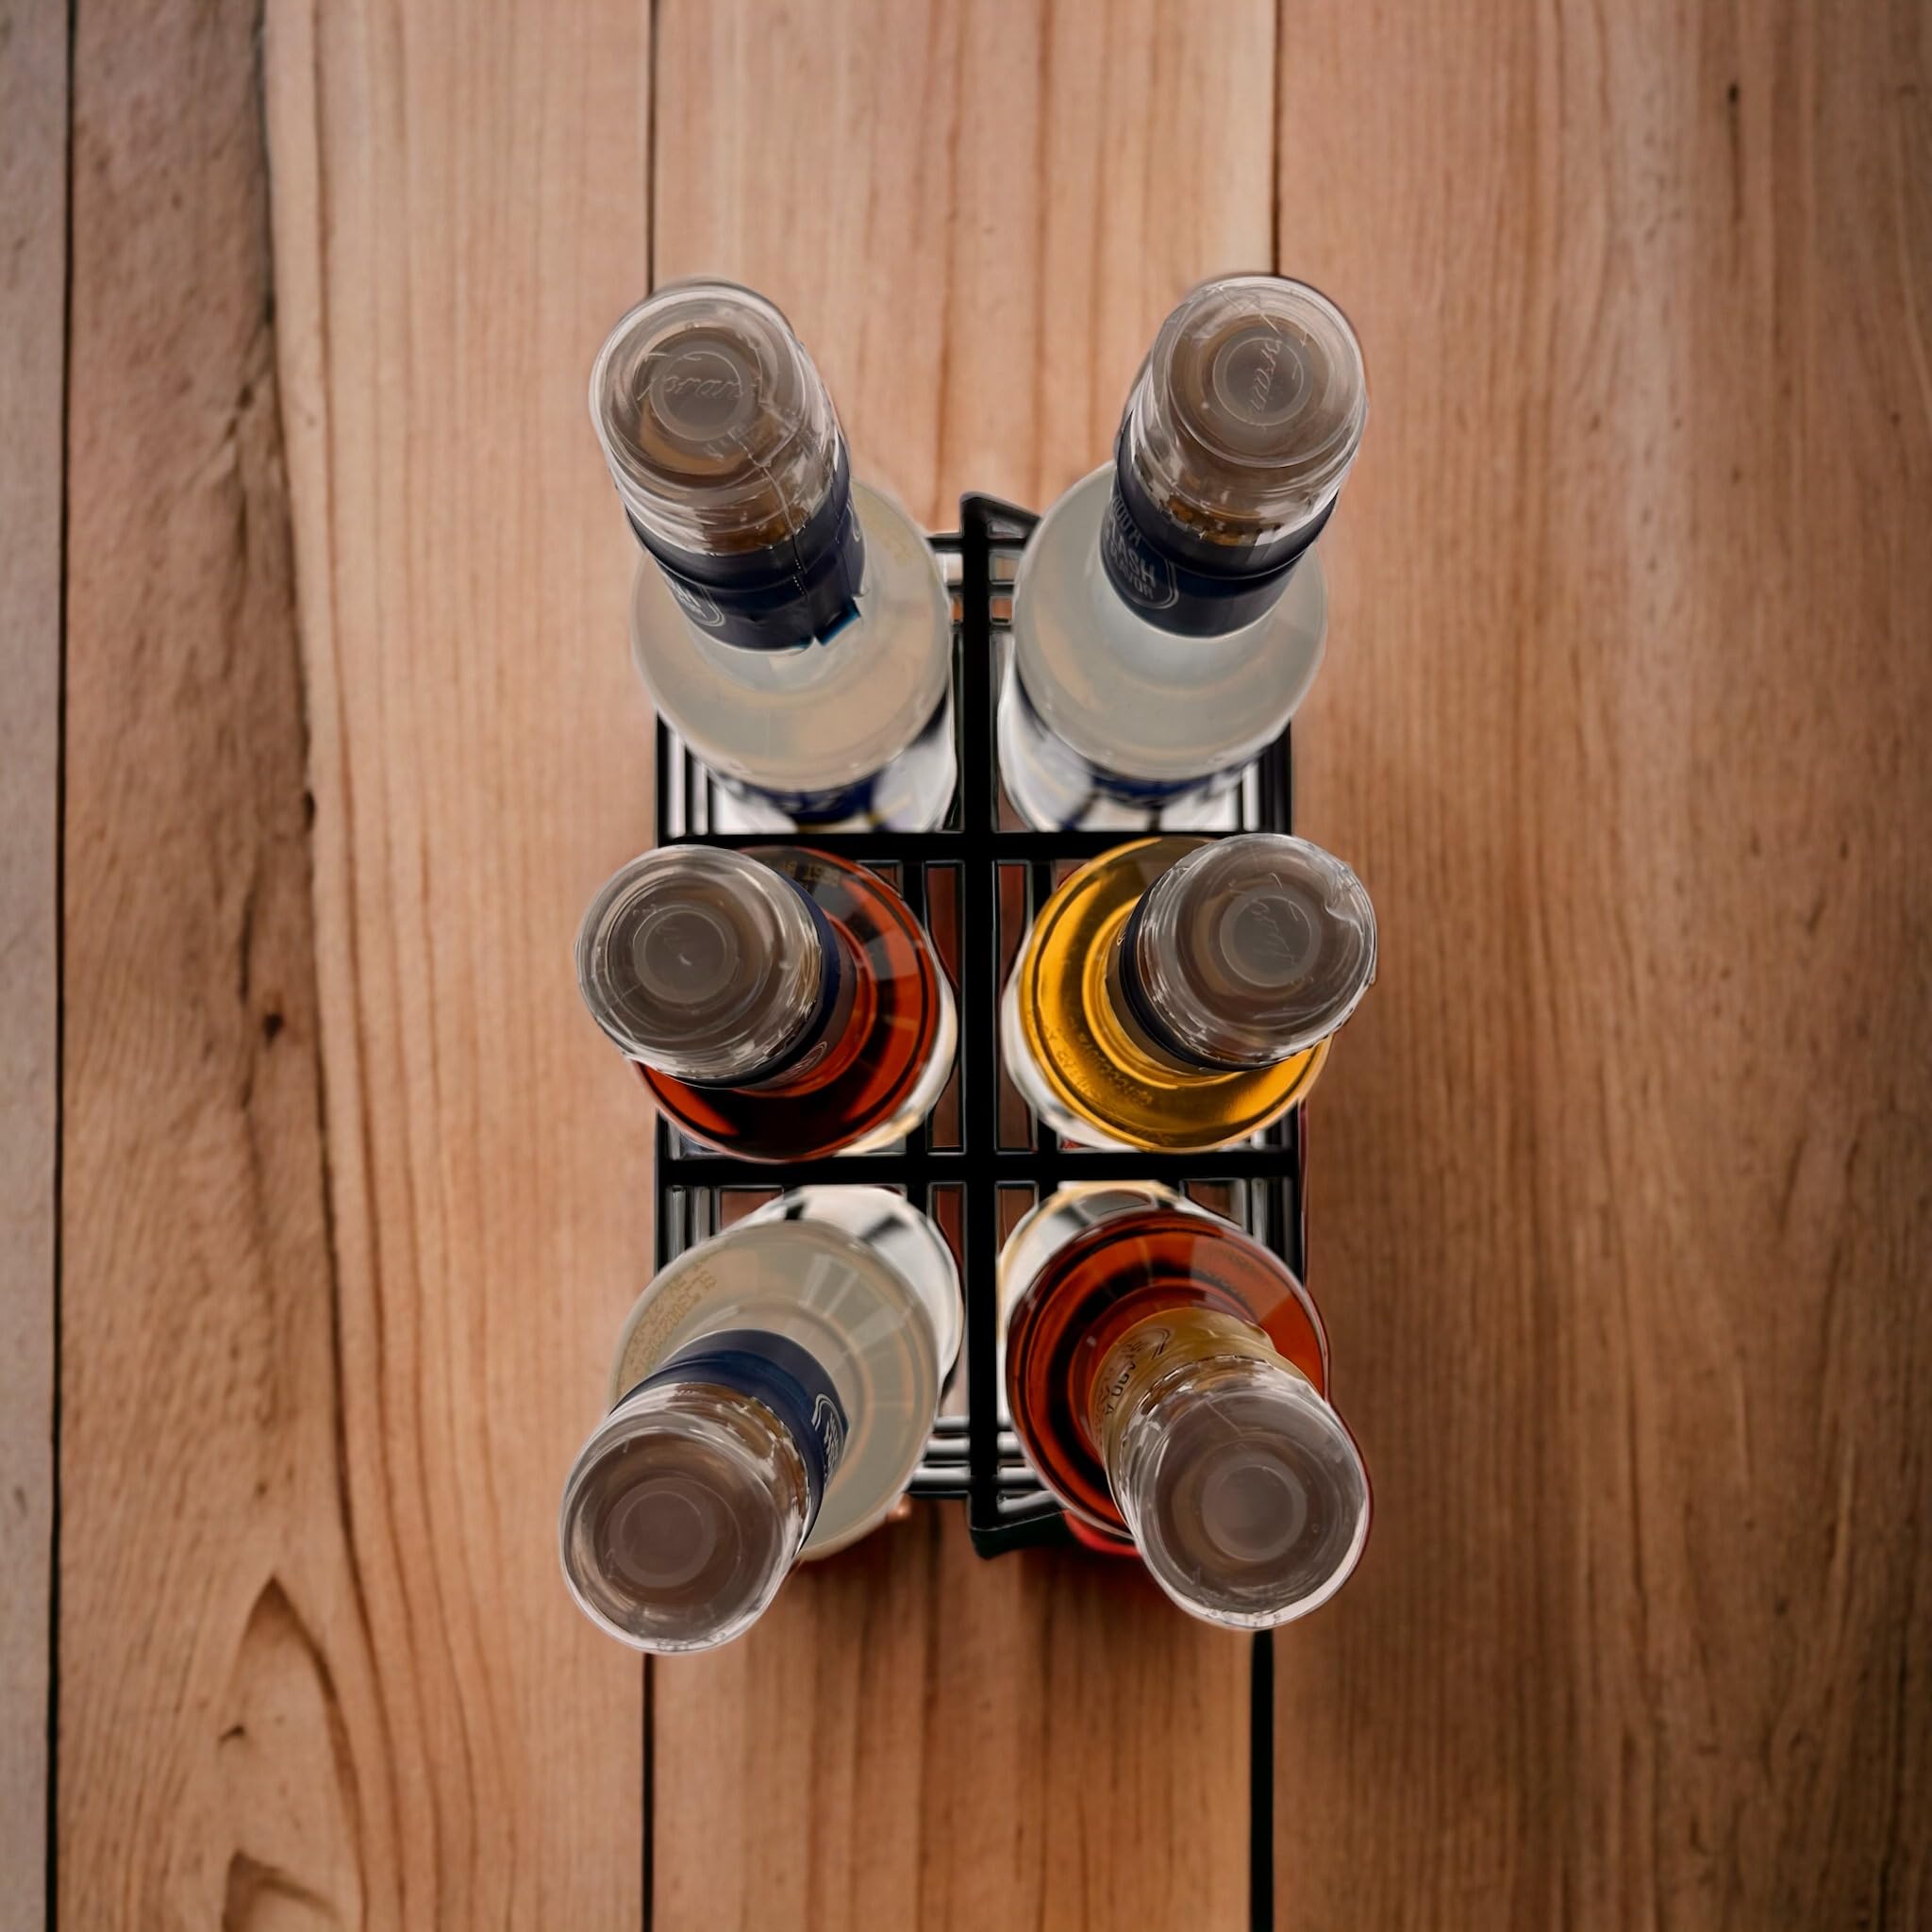 Coffee syrup organizer for 12.7 Oz bottles - Unique rack for Torani Syrup 12.7 ounce bottles, great coffee bar organizer and decor - Perfect size bar accessory 6 bottle capacity holder